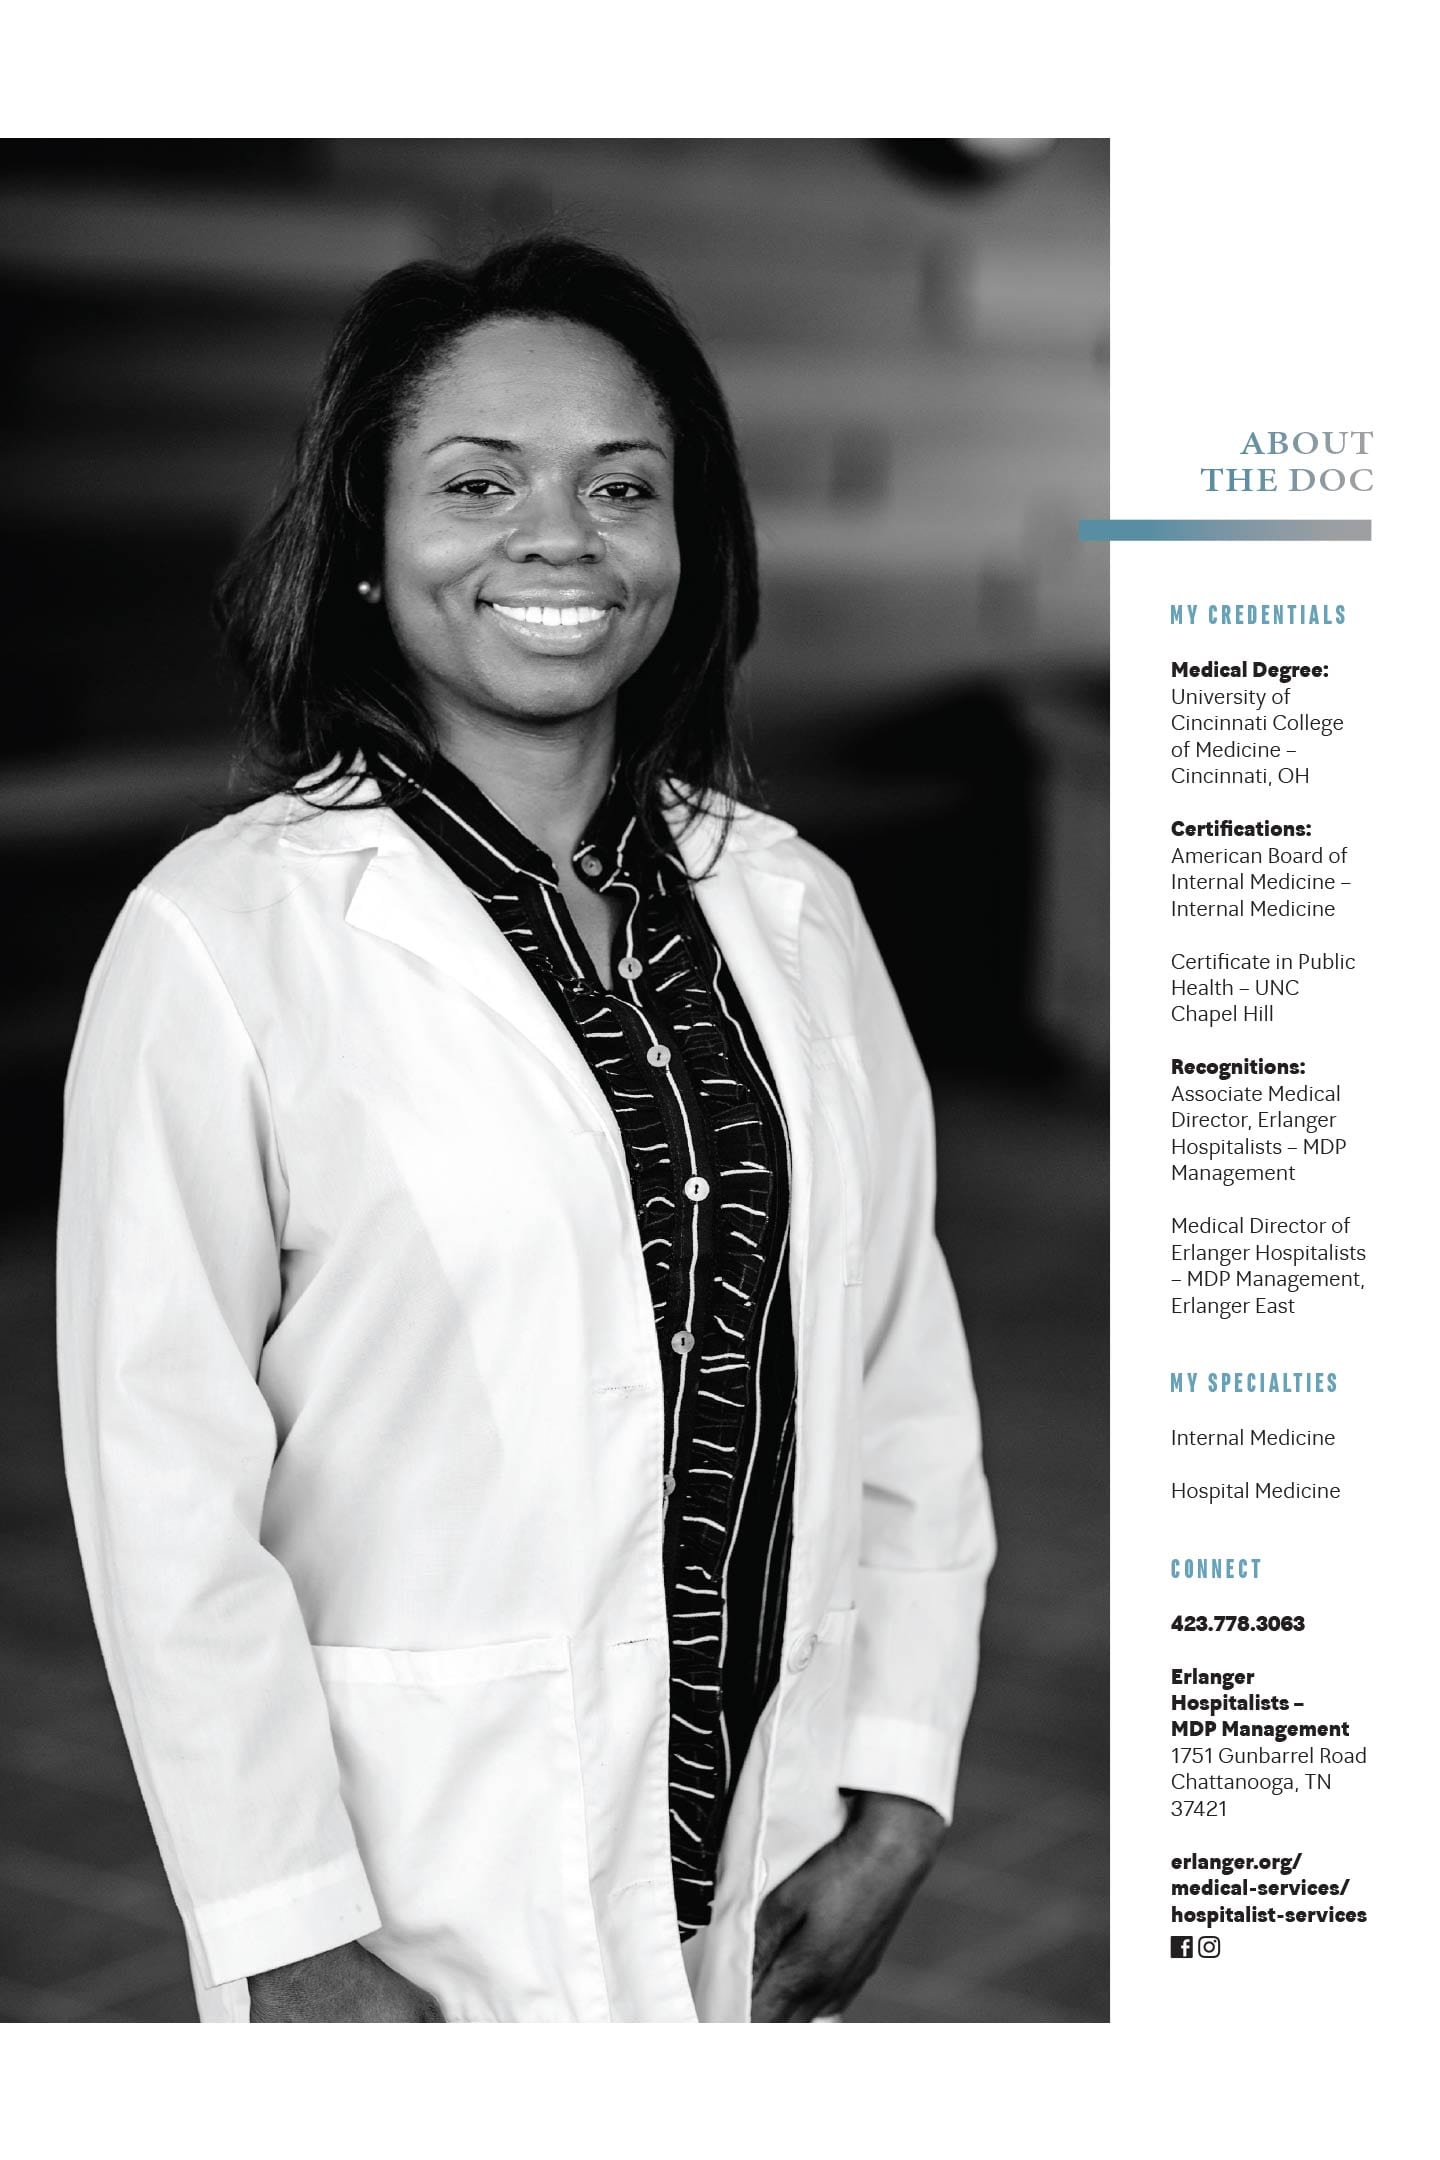 DR. TEABRA SWAFFORD AT ERLANGER HOSPITALISTS – MDP MANAGEMENT in chattanooga credentials specialties and contact info